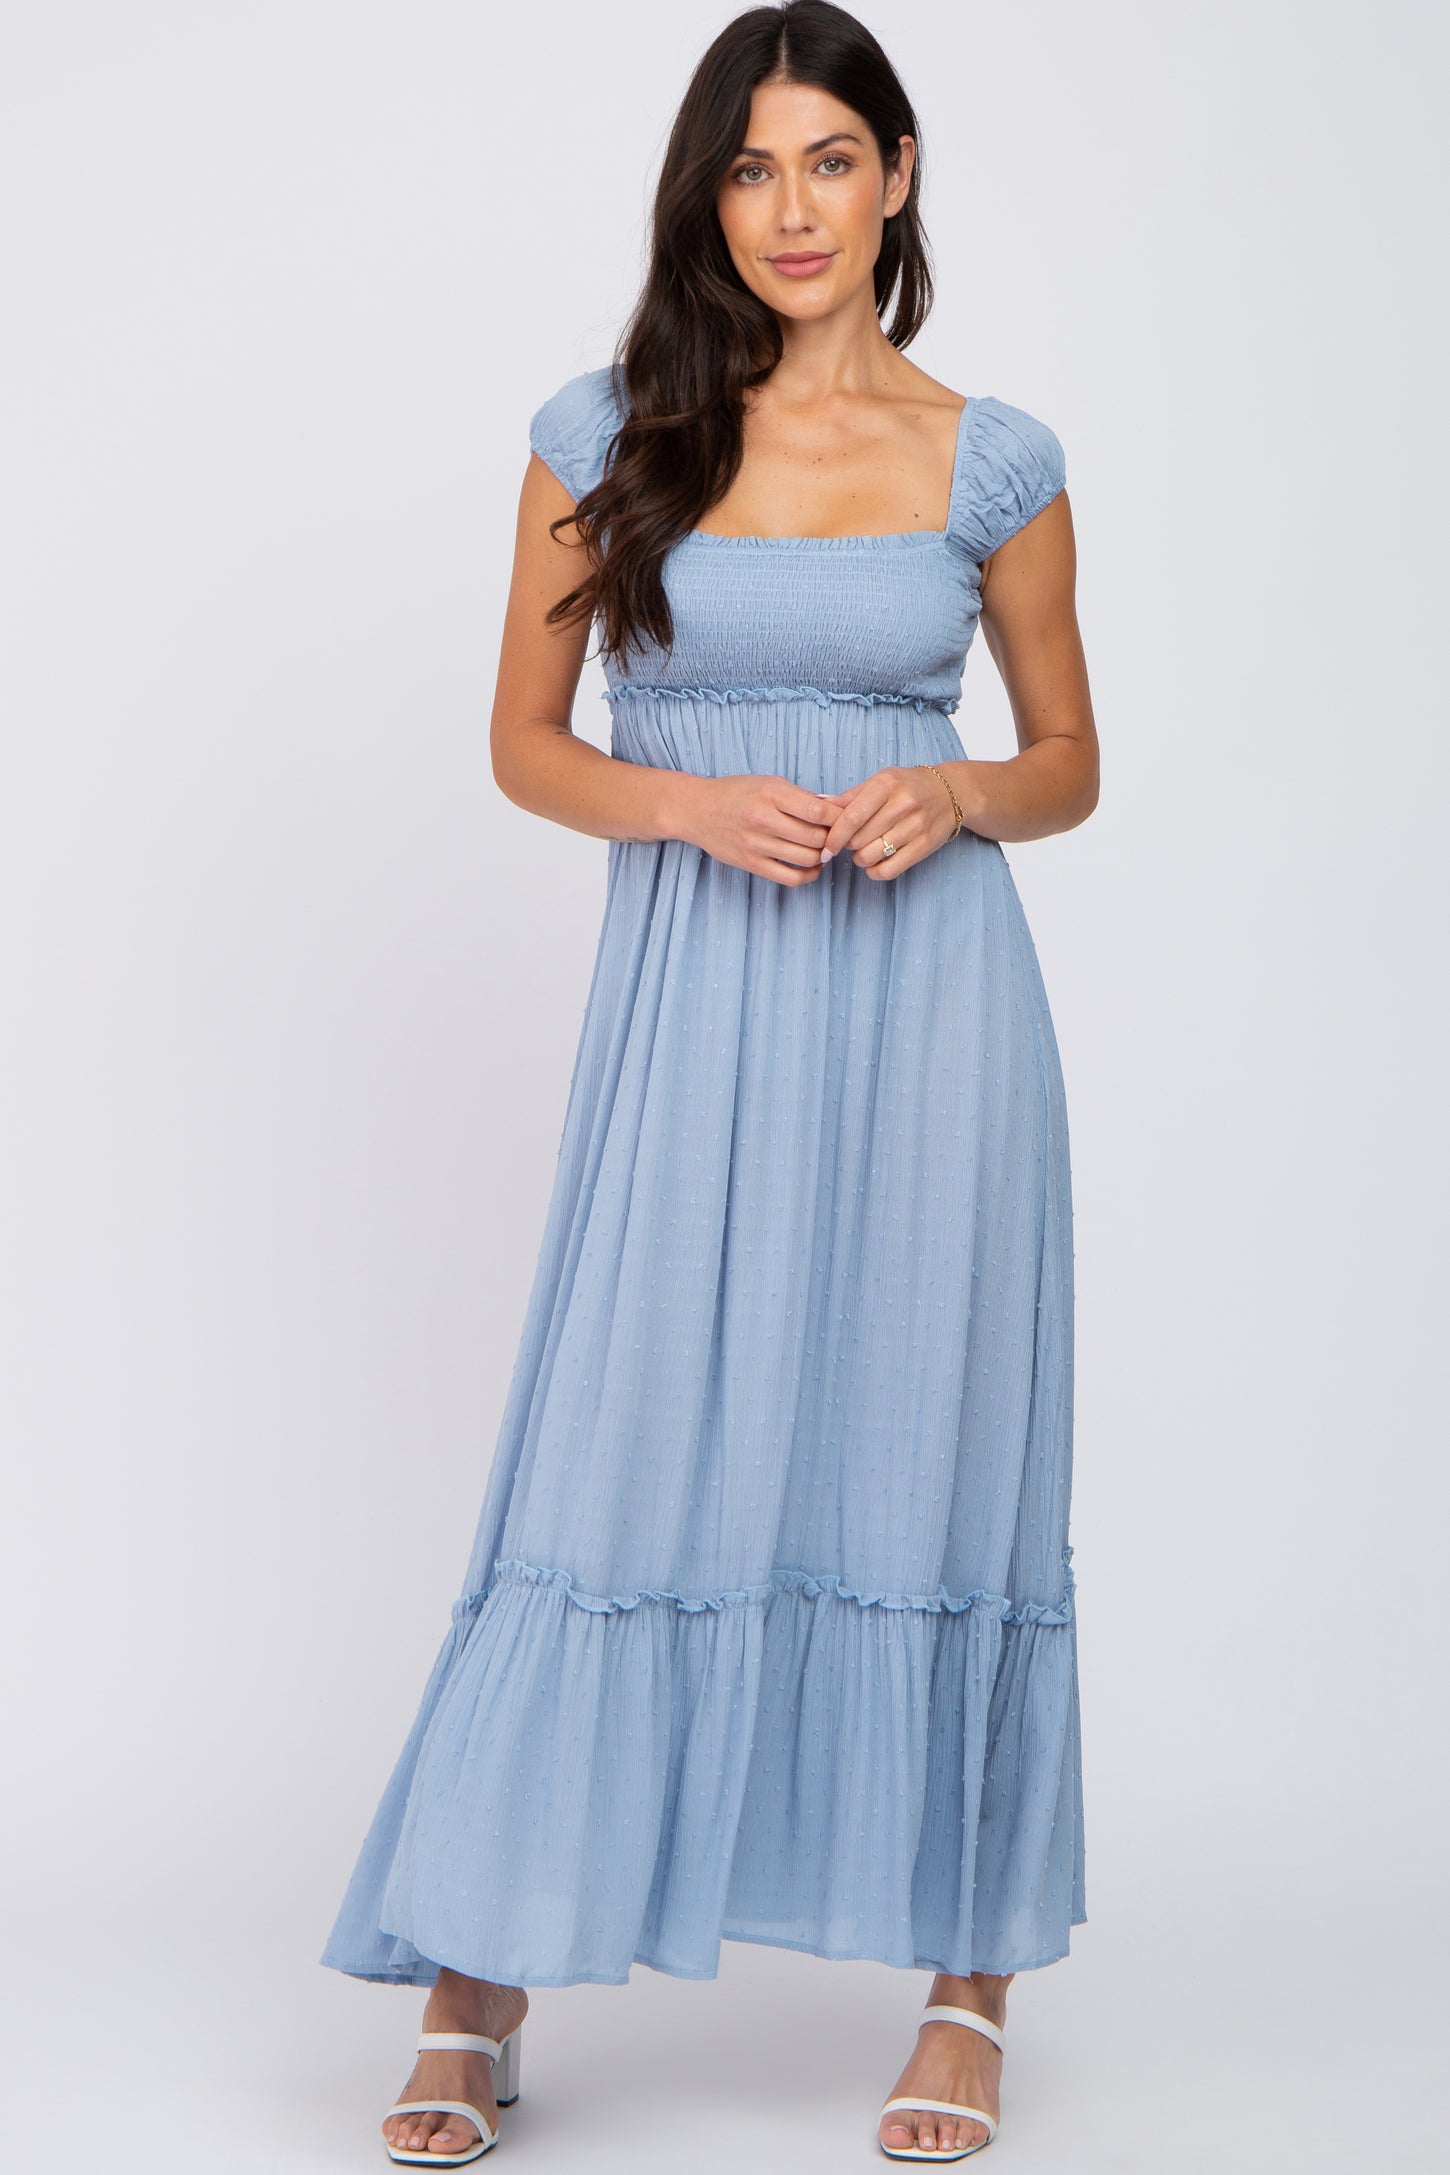 Blue Dotted Smocked Square Neck Criss Cross Back Maternity Maxi Dress ...